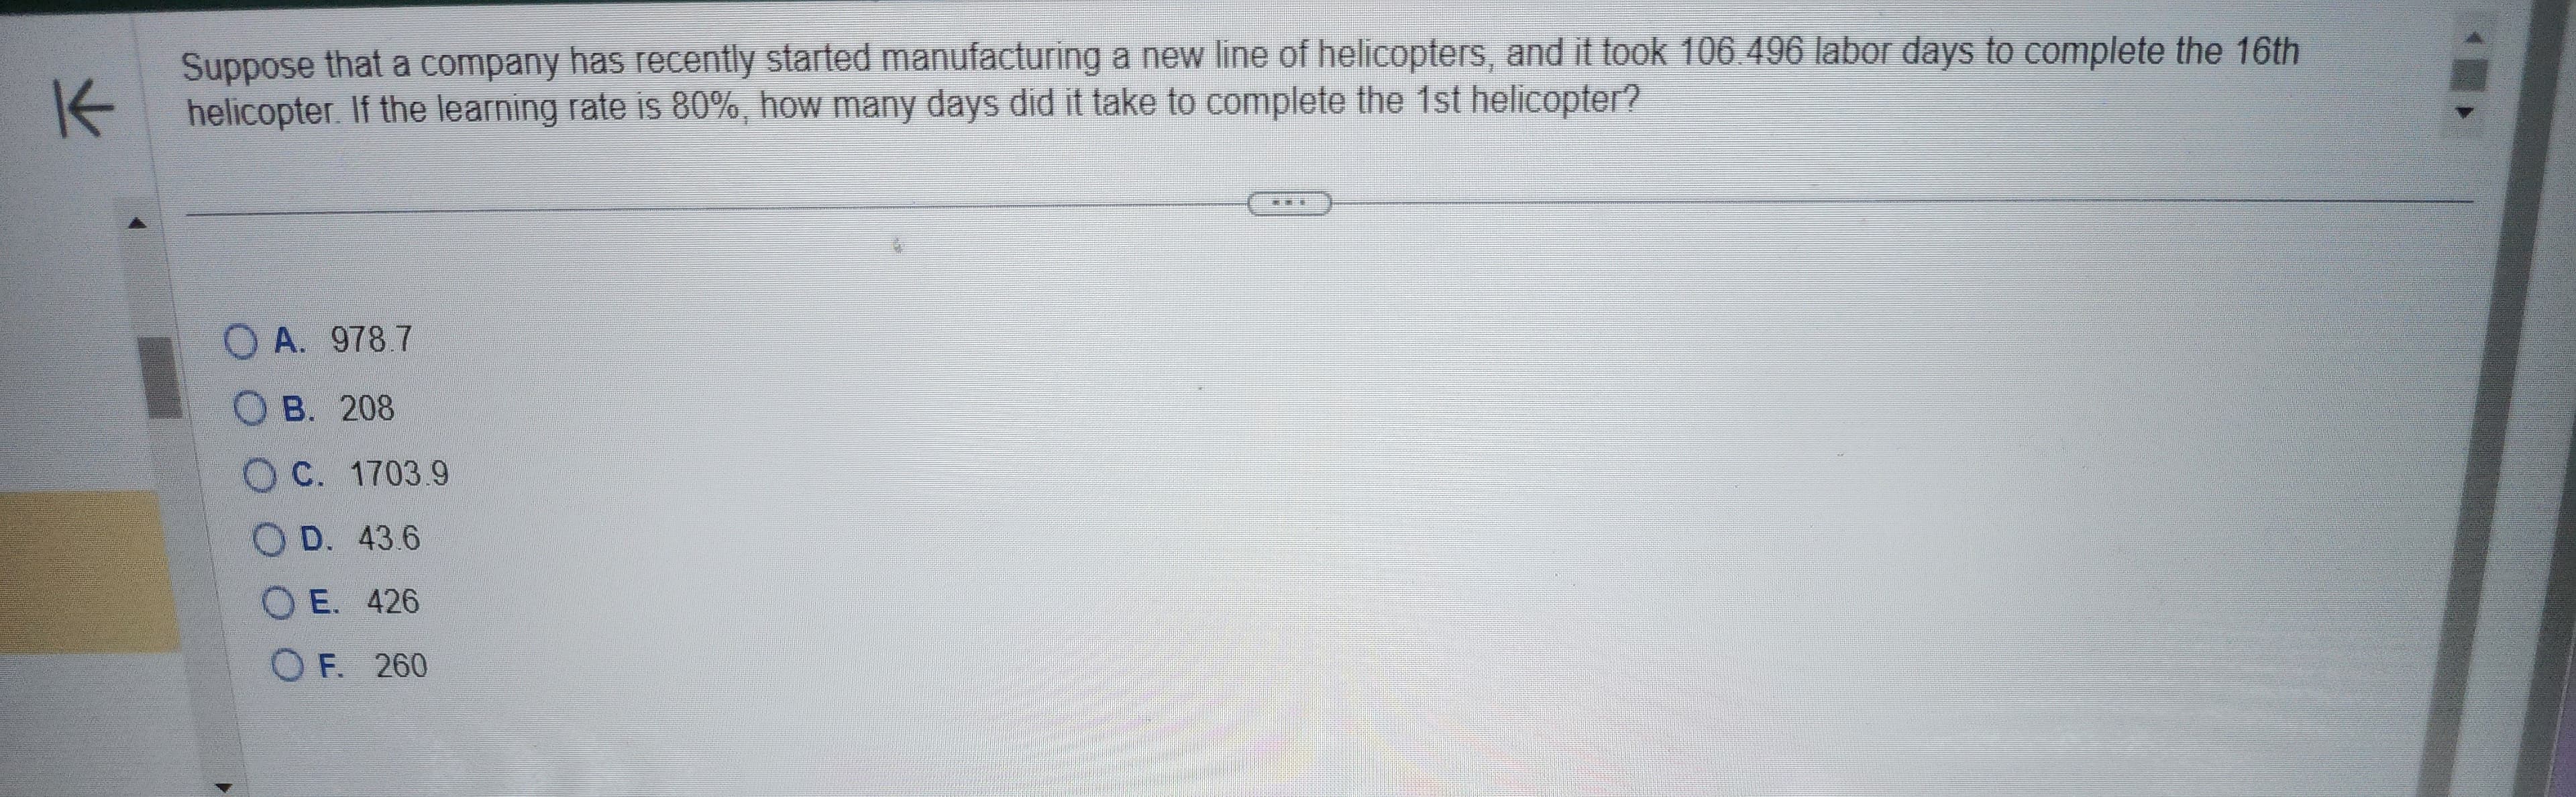 K
Suppose that a company has recently started manufacturing a new line of helicopters, and it took 106.496 labor days to complete the 16th
helicopter. If the learning rate is 80%, how many days did it take to complete the 1st helicopter?
A. 978.7
OB. 208
C. 1703.9
O D. 43.6
OE. 426
OF. 260
TALE